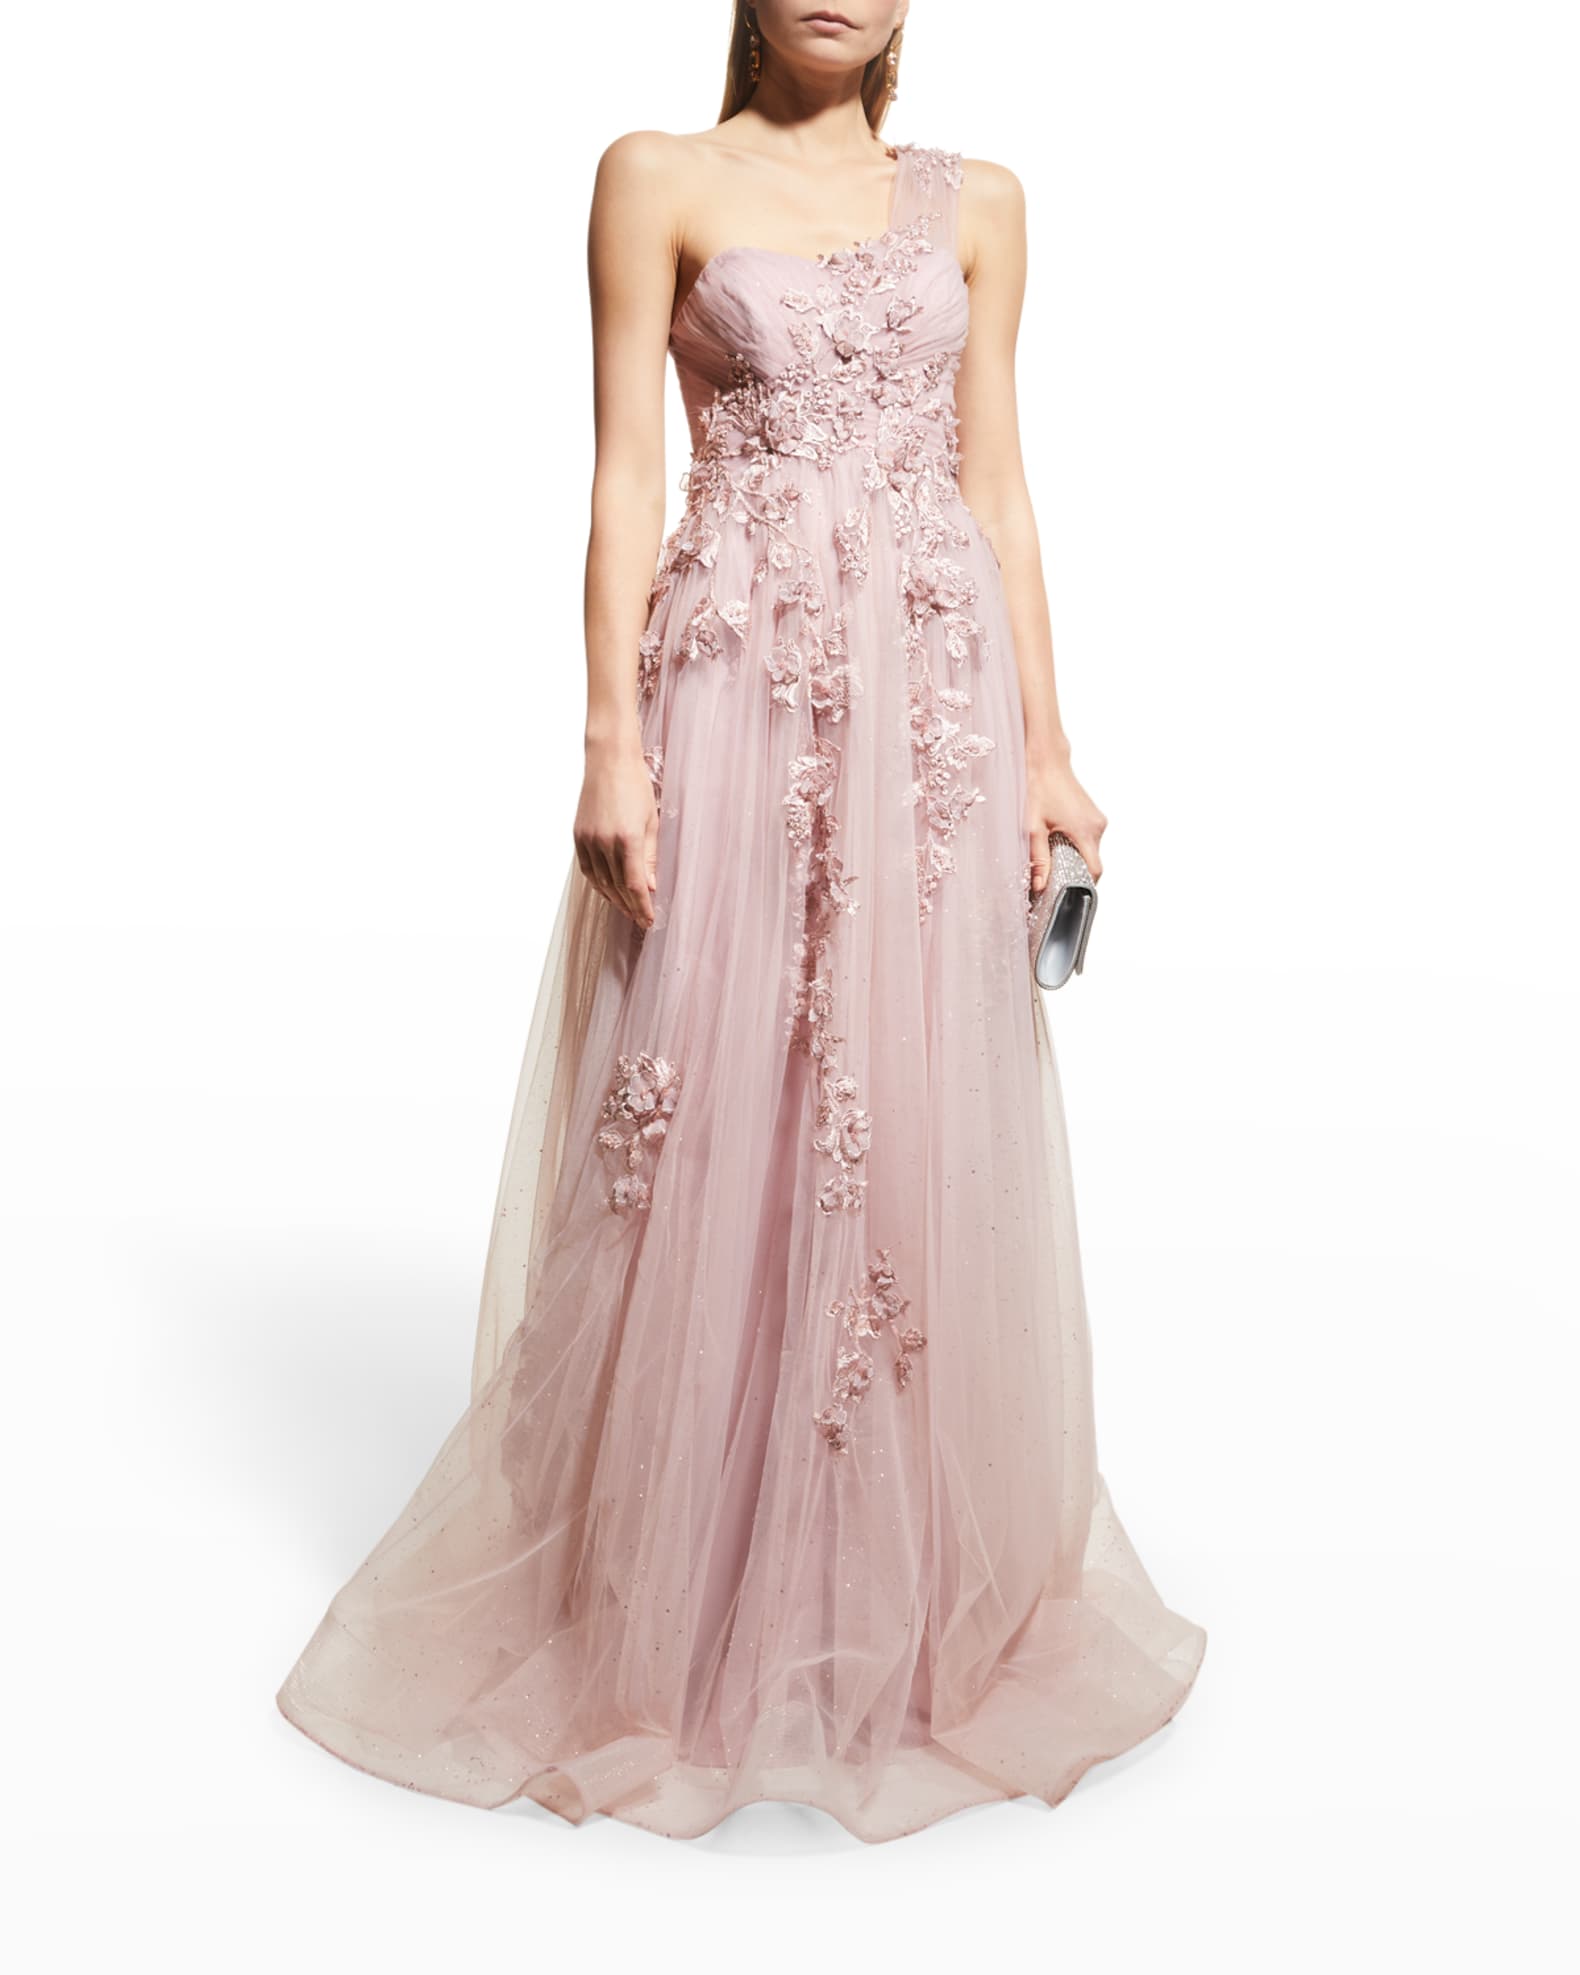 Rickie Freeman for Teri Jon Pleated Tulle Floral Applique Gown | Neiman ...